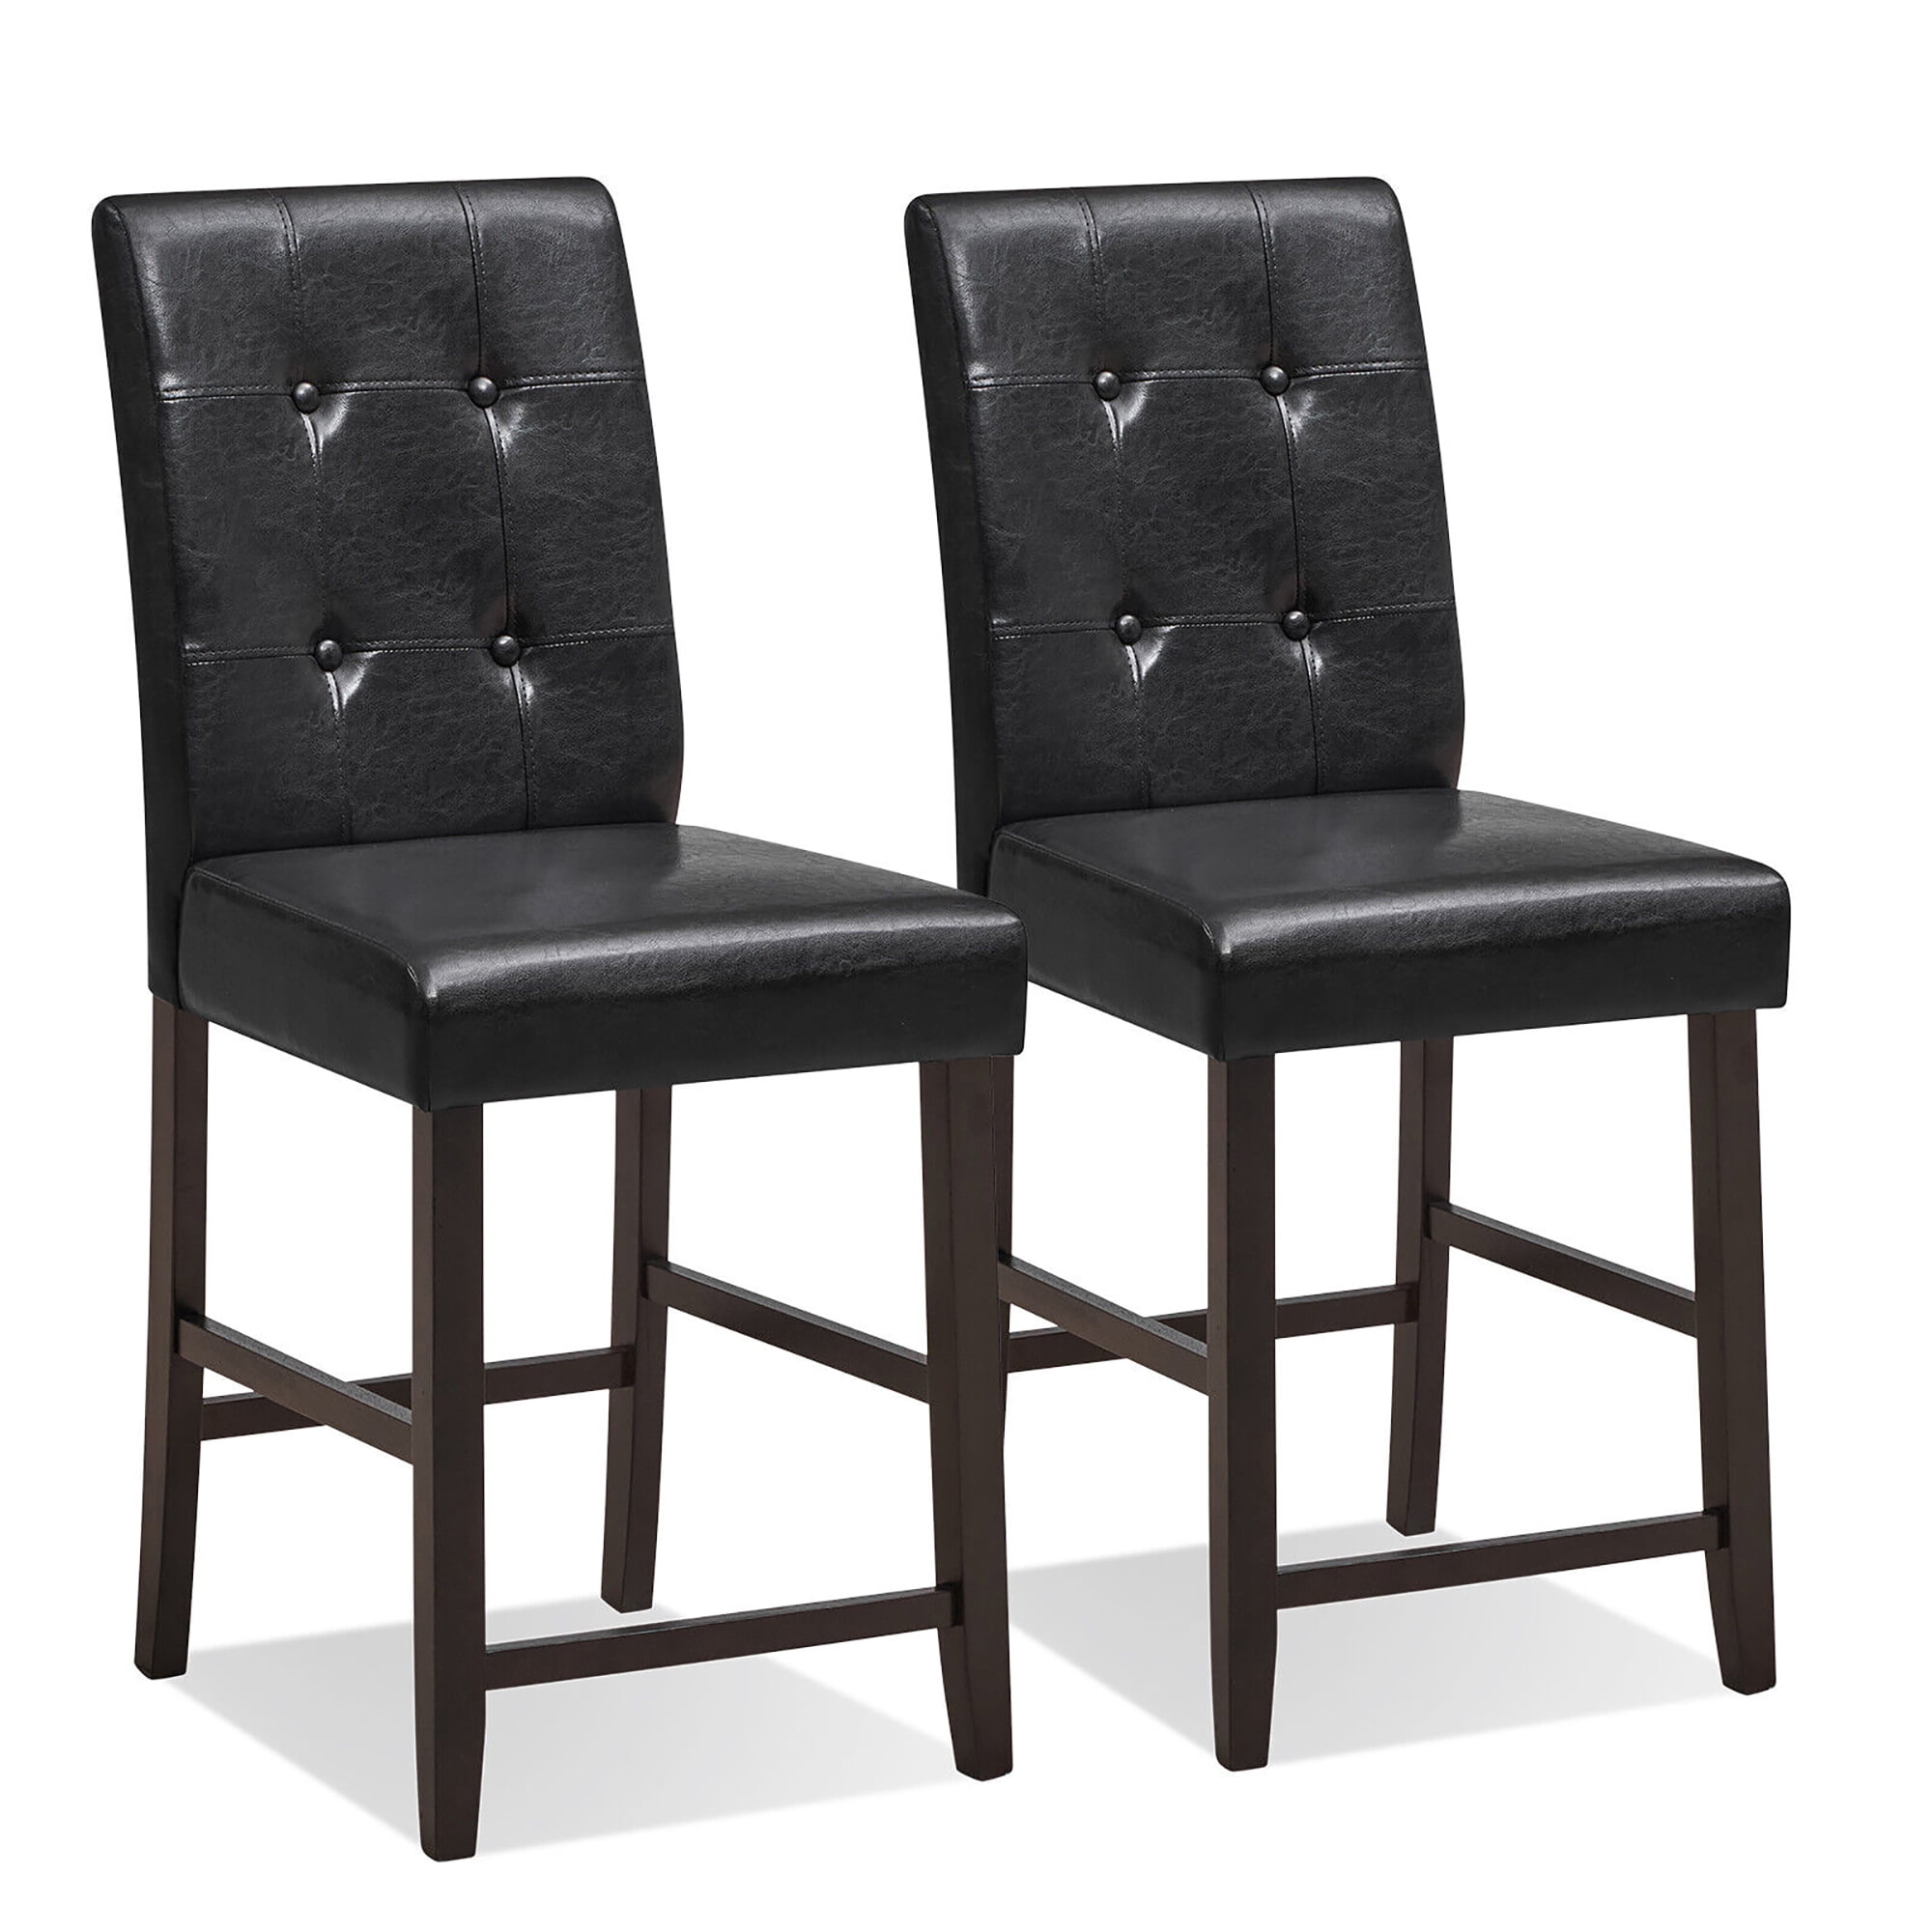 Gymax Set of 2 Bar Stools Tufted Counter Height Pub Kitchen Chairs w ...